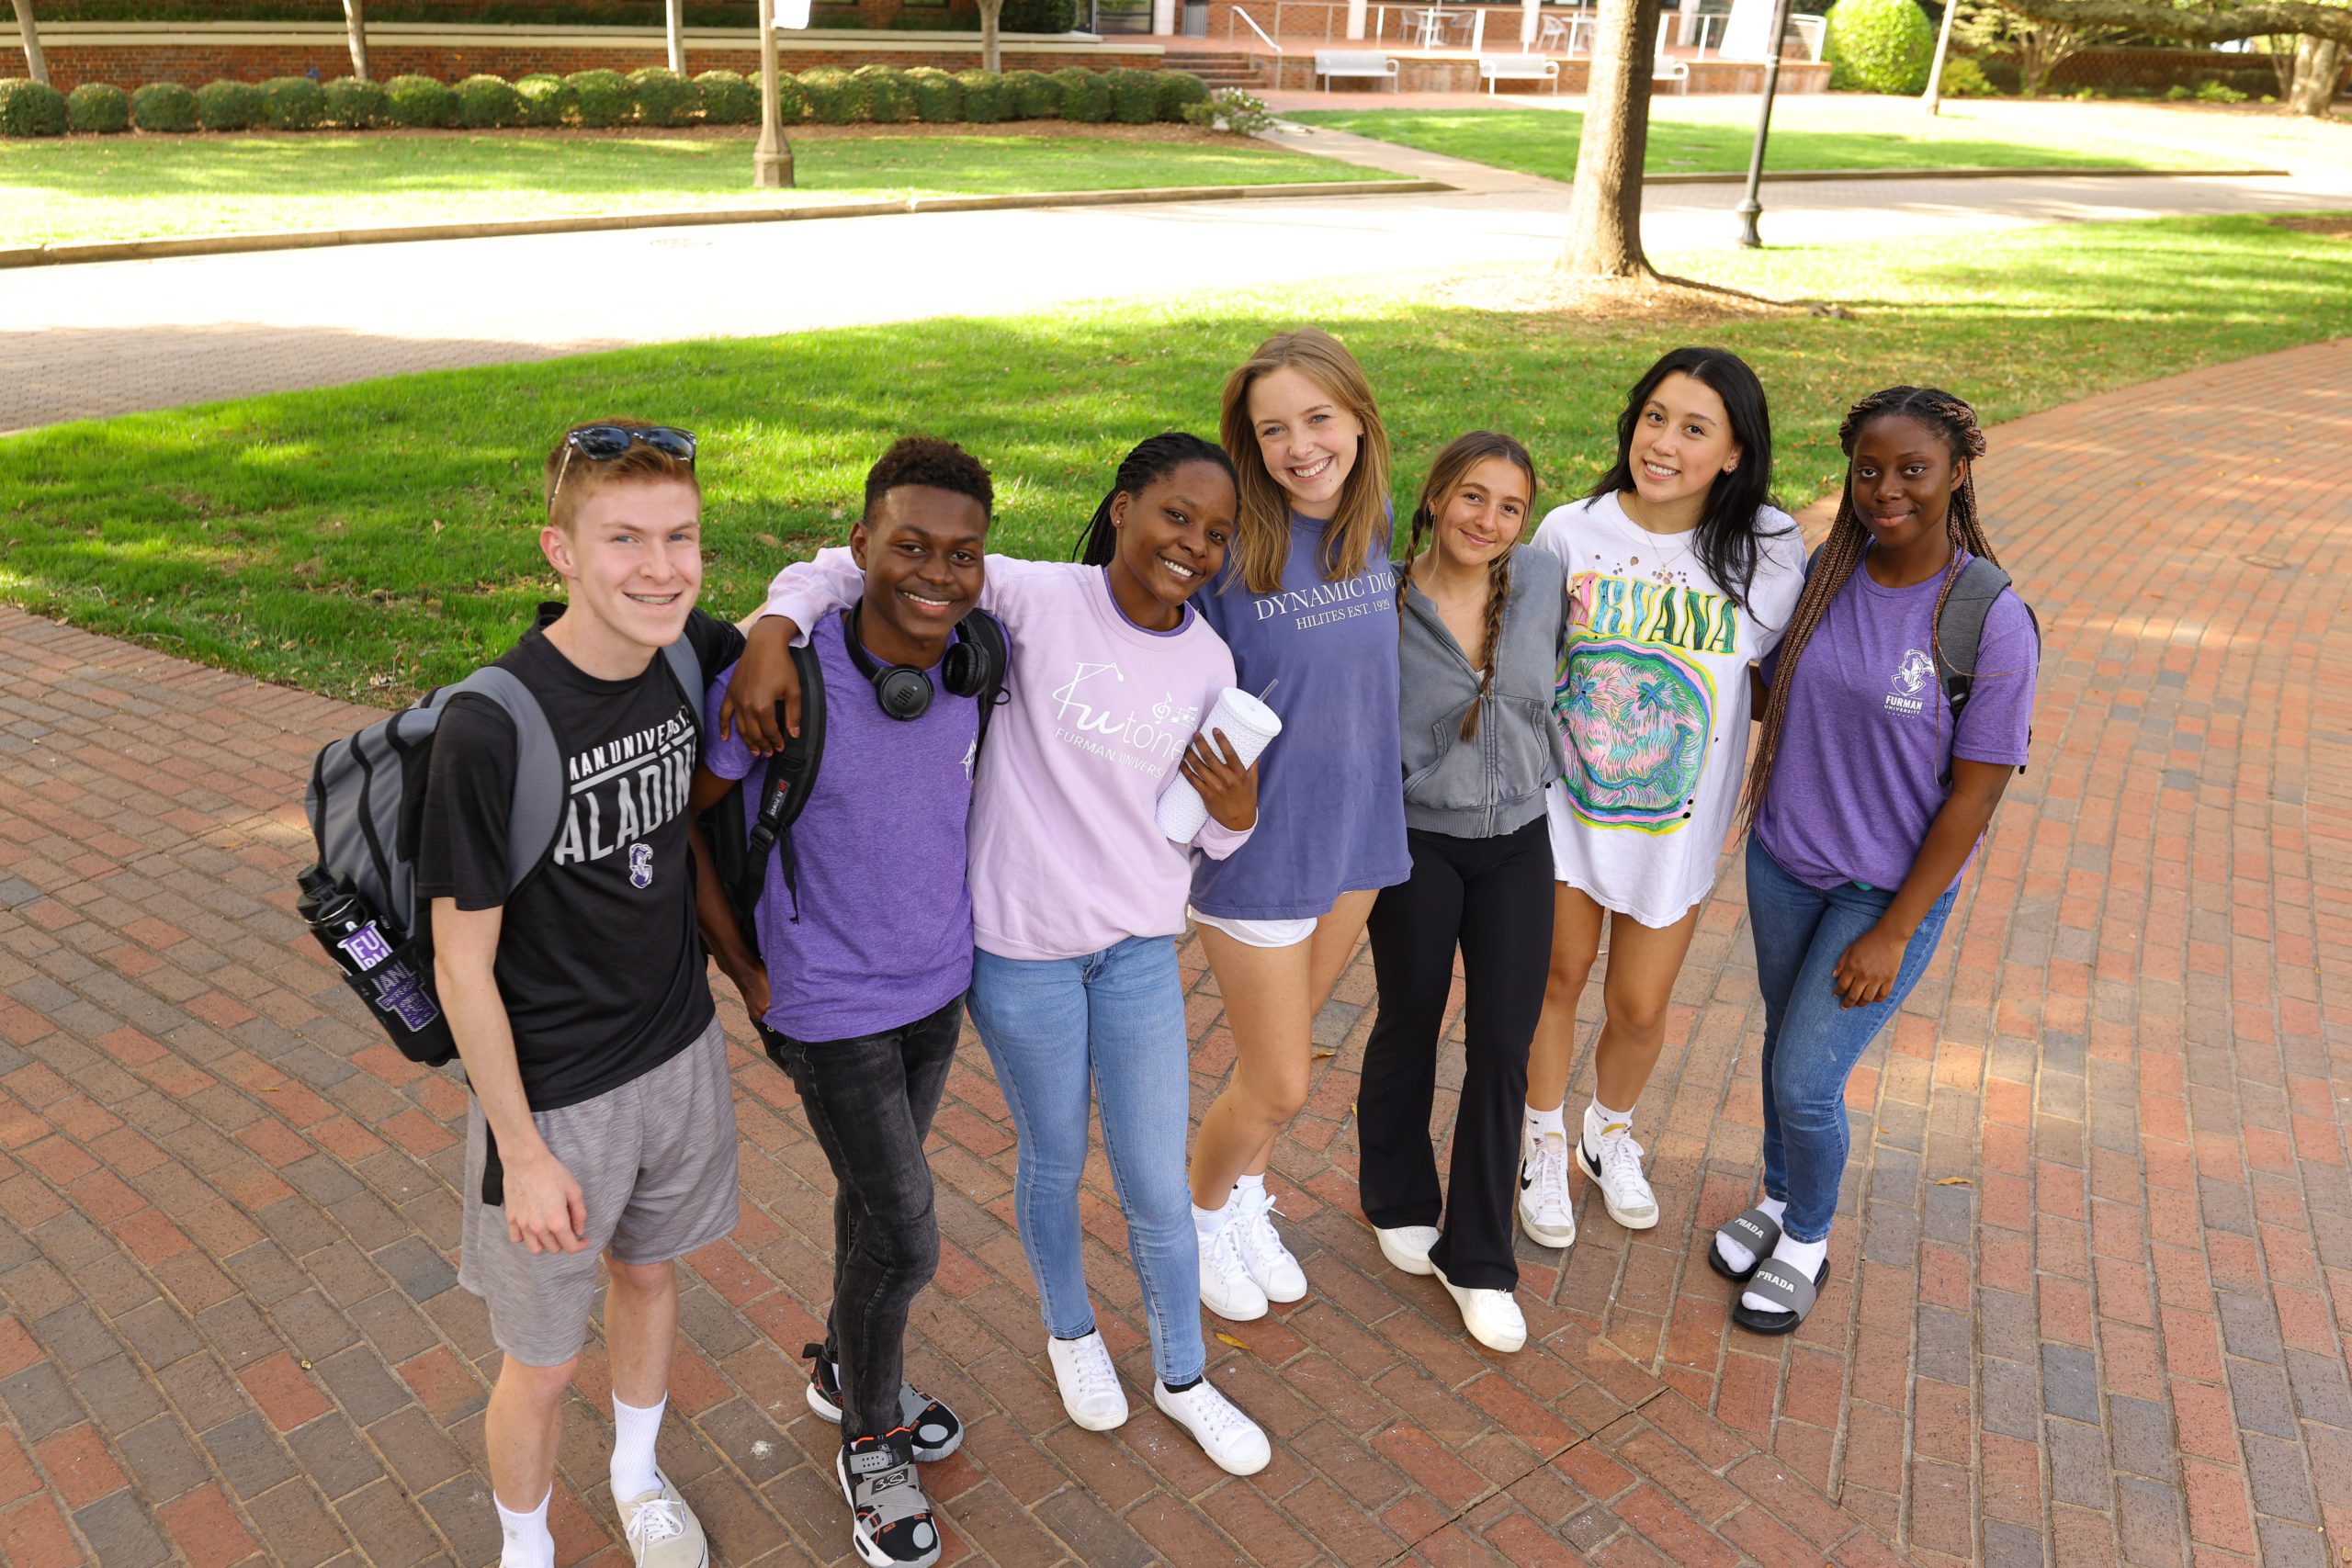 male and female students pose together on campus with their arms around one another